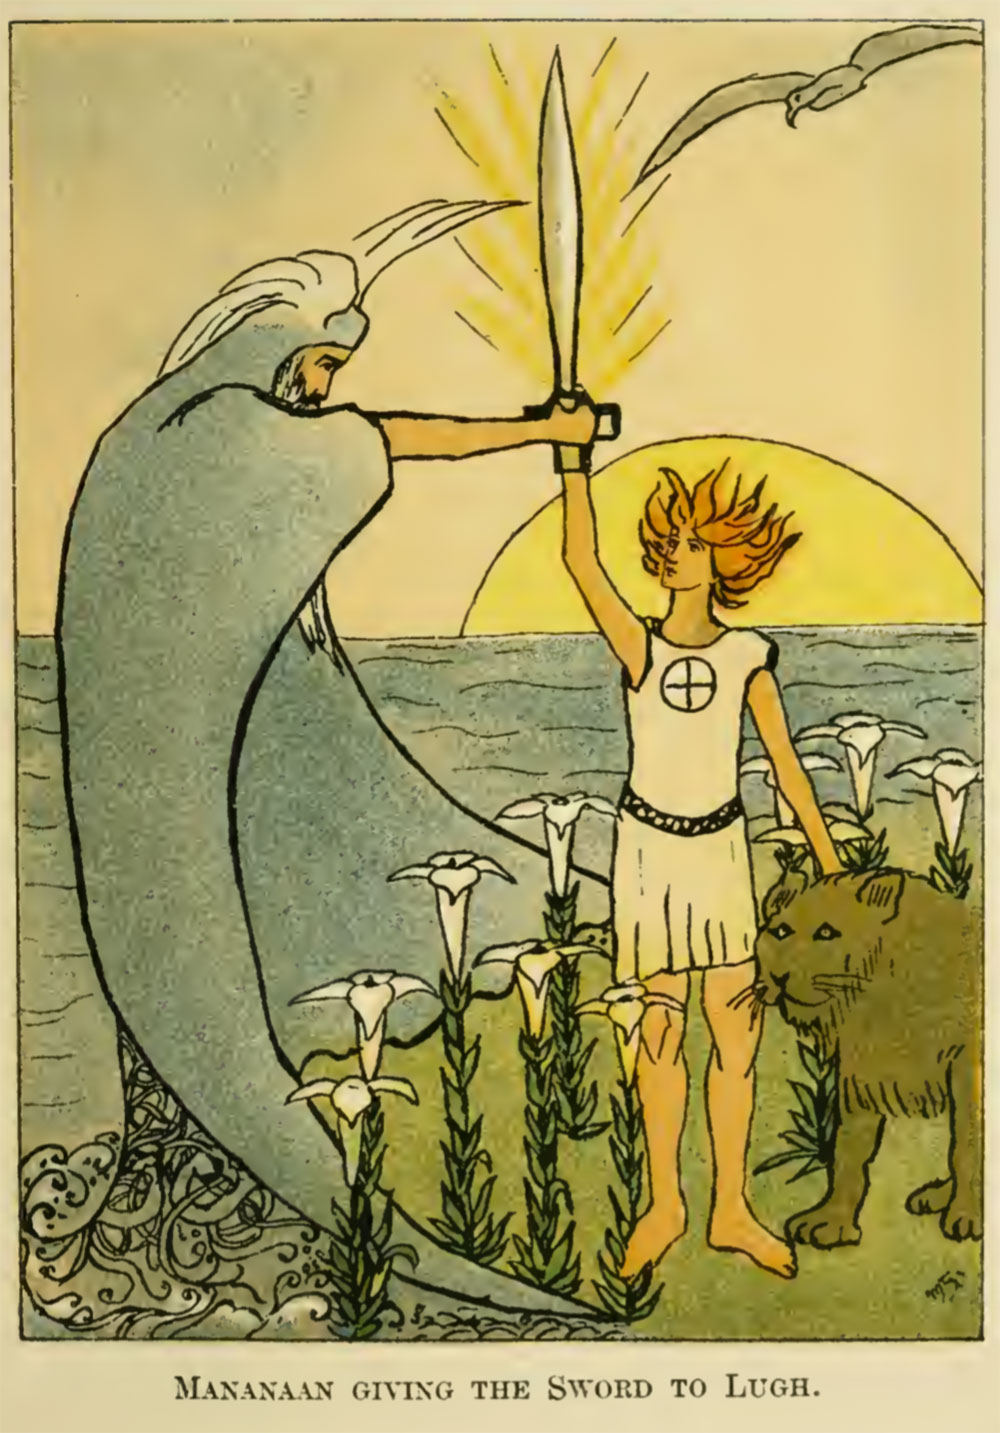 Maud Gonne's illustration of Lugh with the Sword of Light.